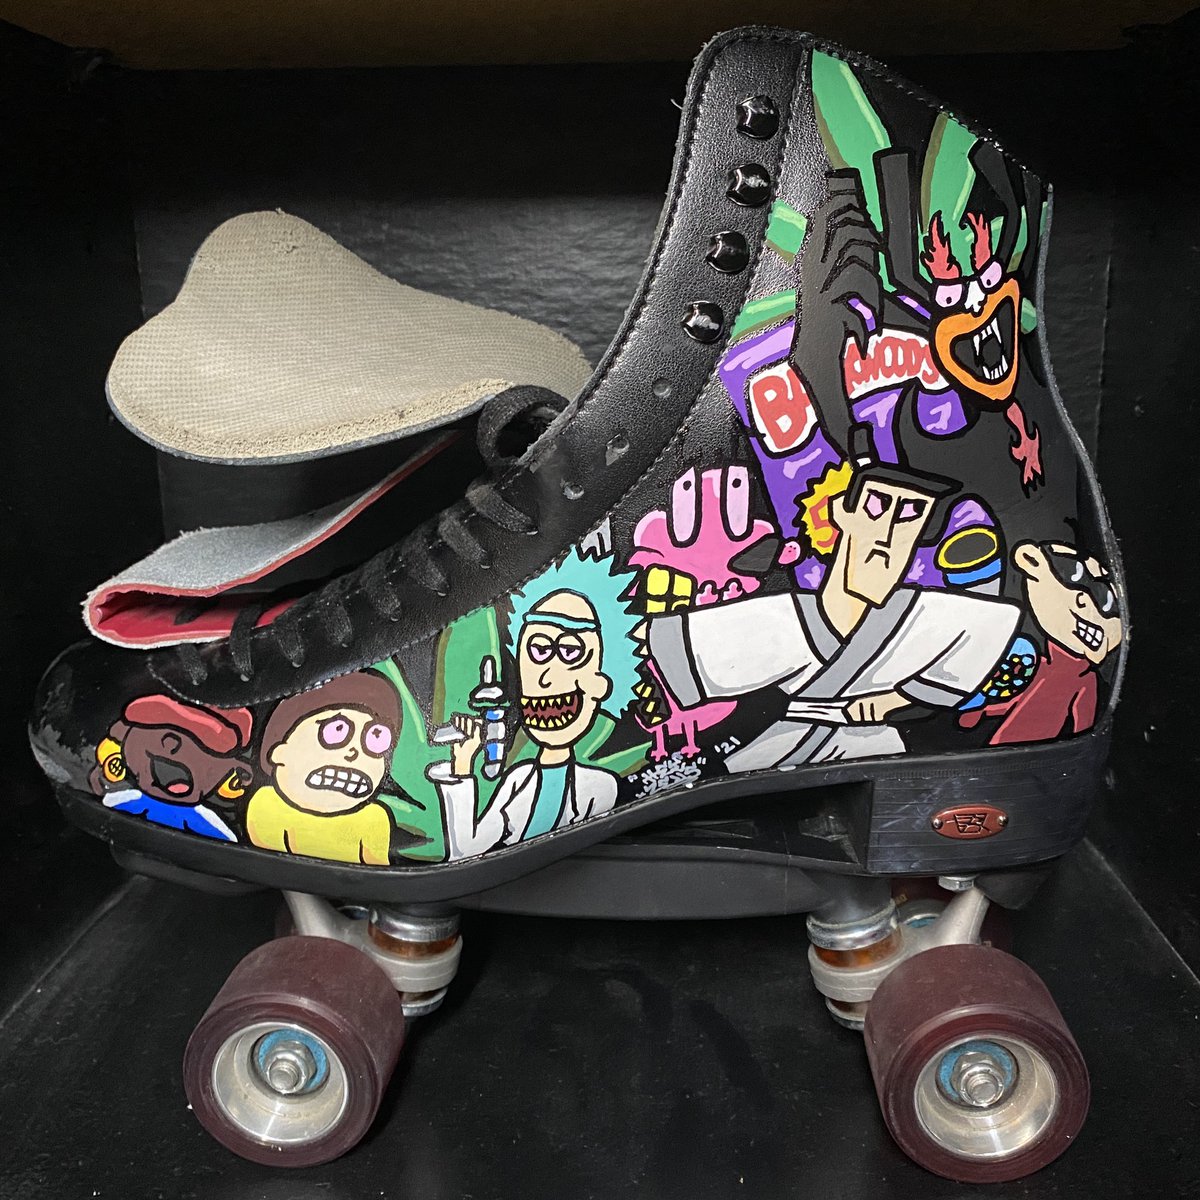  FINALLY DONE! Thank you so much  @okaymaal for trusting me to bring your vision to life! I had so much fun painting these nostalgic skates! Process photos will be in the thread below 